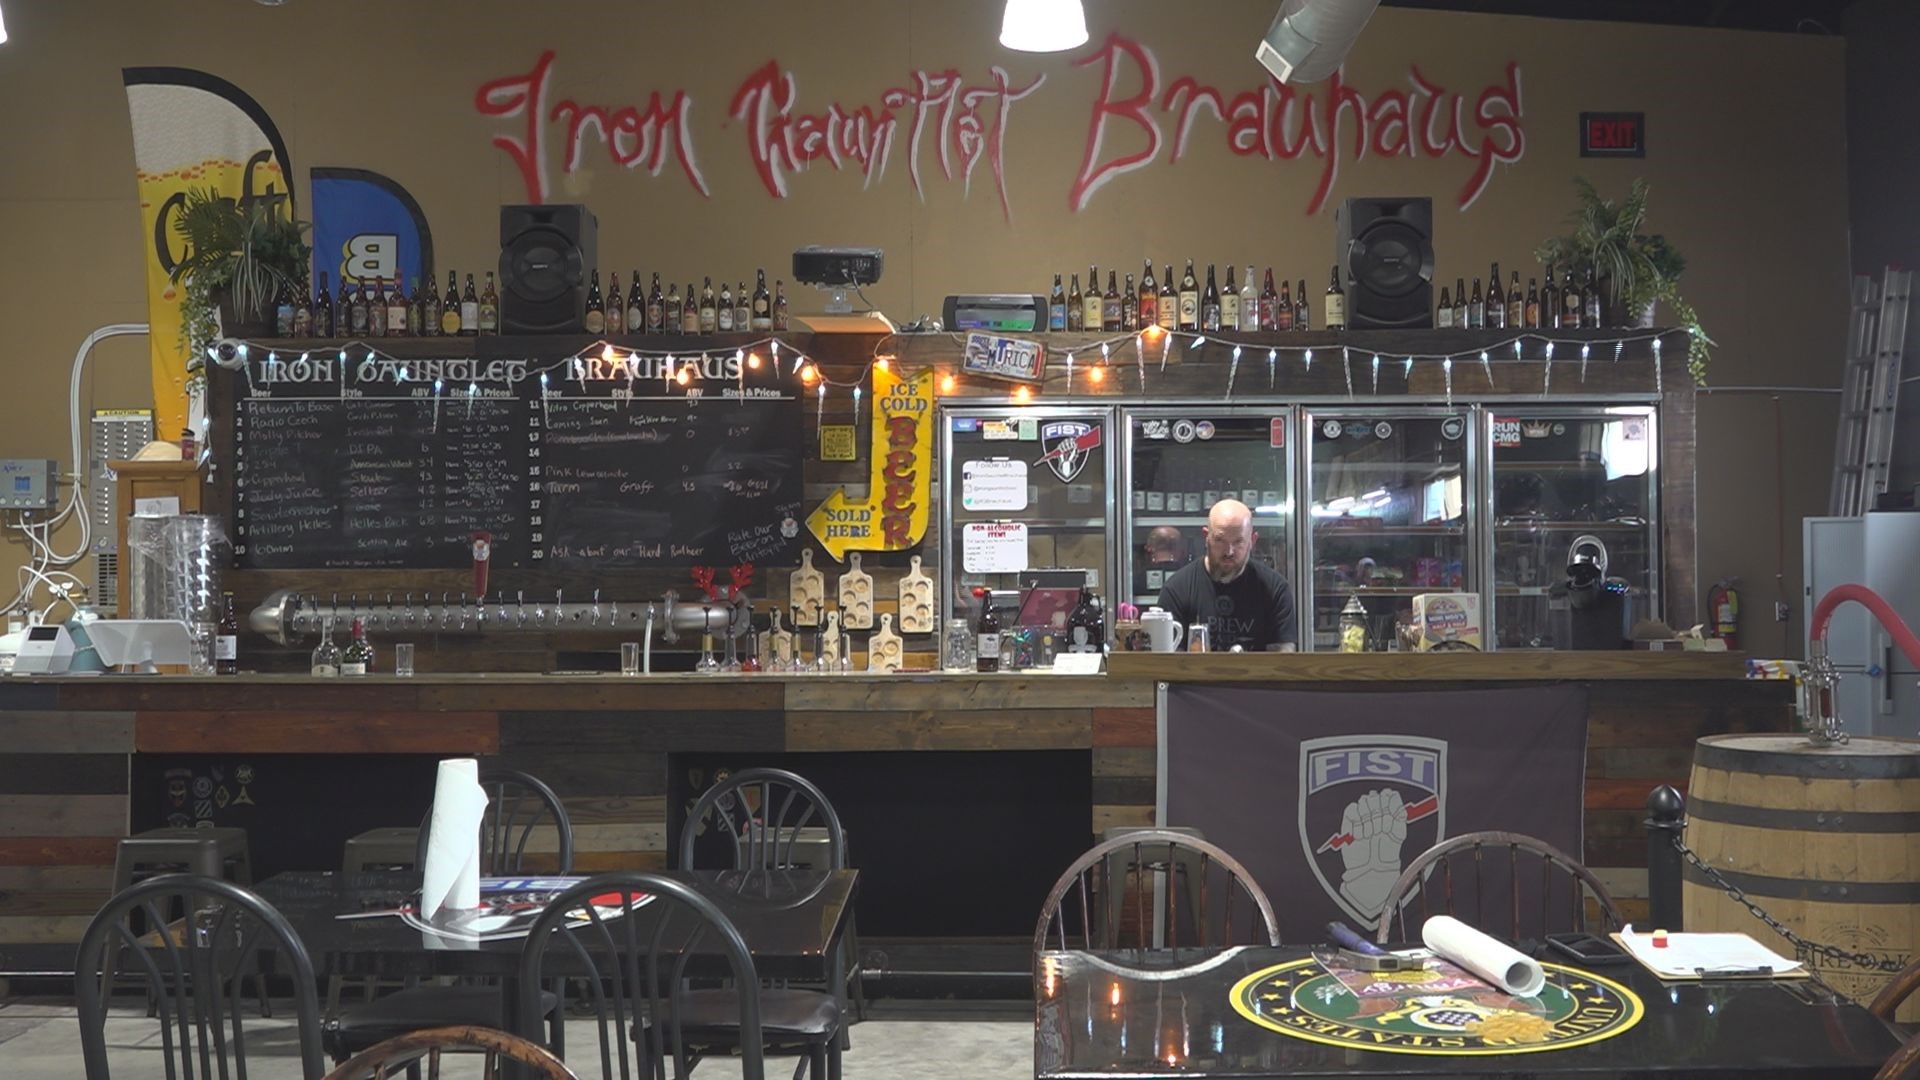 The owners of Iron Gauntlet Brauhaus in Killeen say they're proud to be the city's first craft microbrewery.